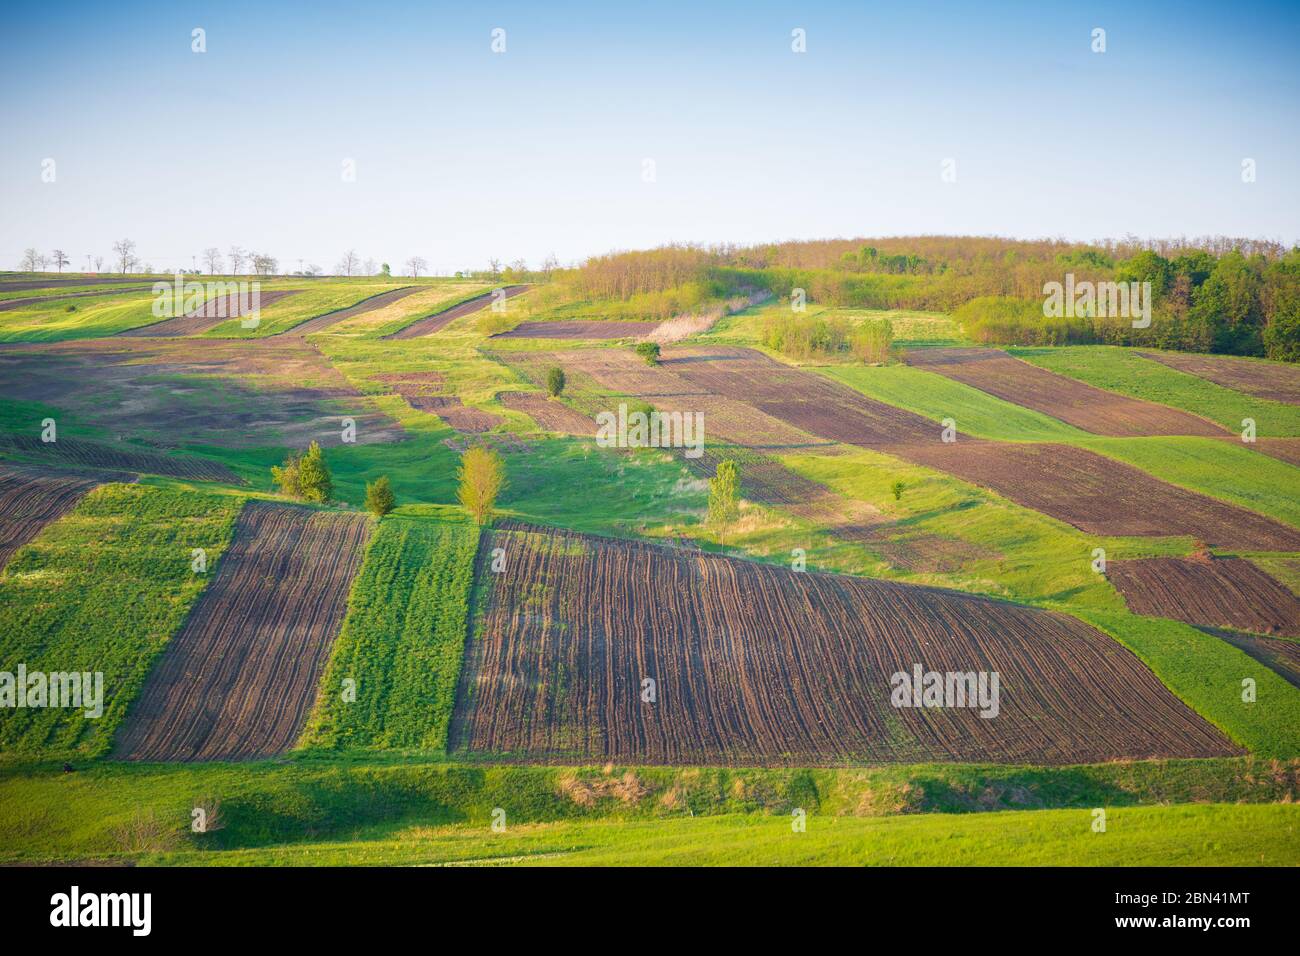 View of the Fields and Agricultural Parcel. Agricultural plots. Stock Photo